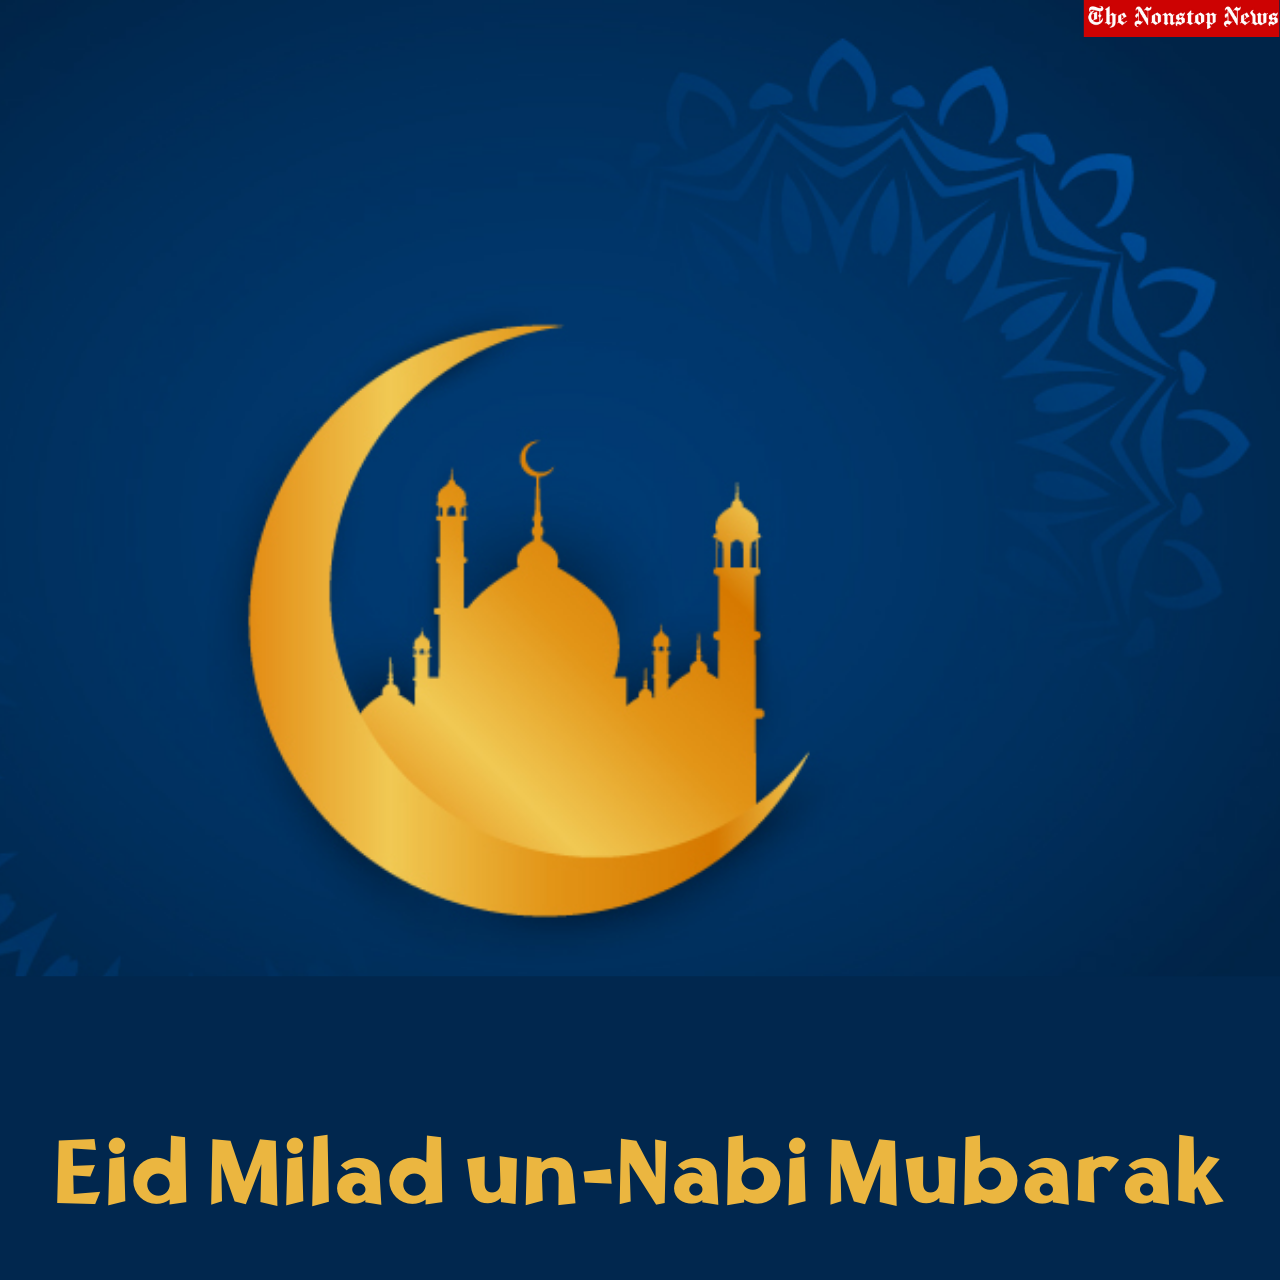 Eid Milad un-Nabi Mubarak 2021 Wishes, Quotes, Greetings, Status, and Messages to Share